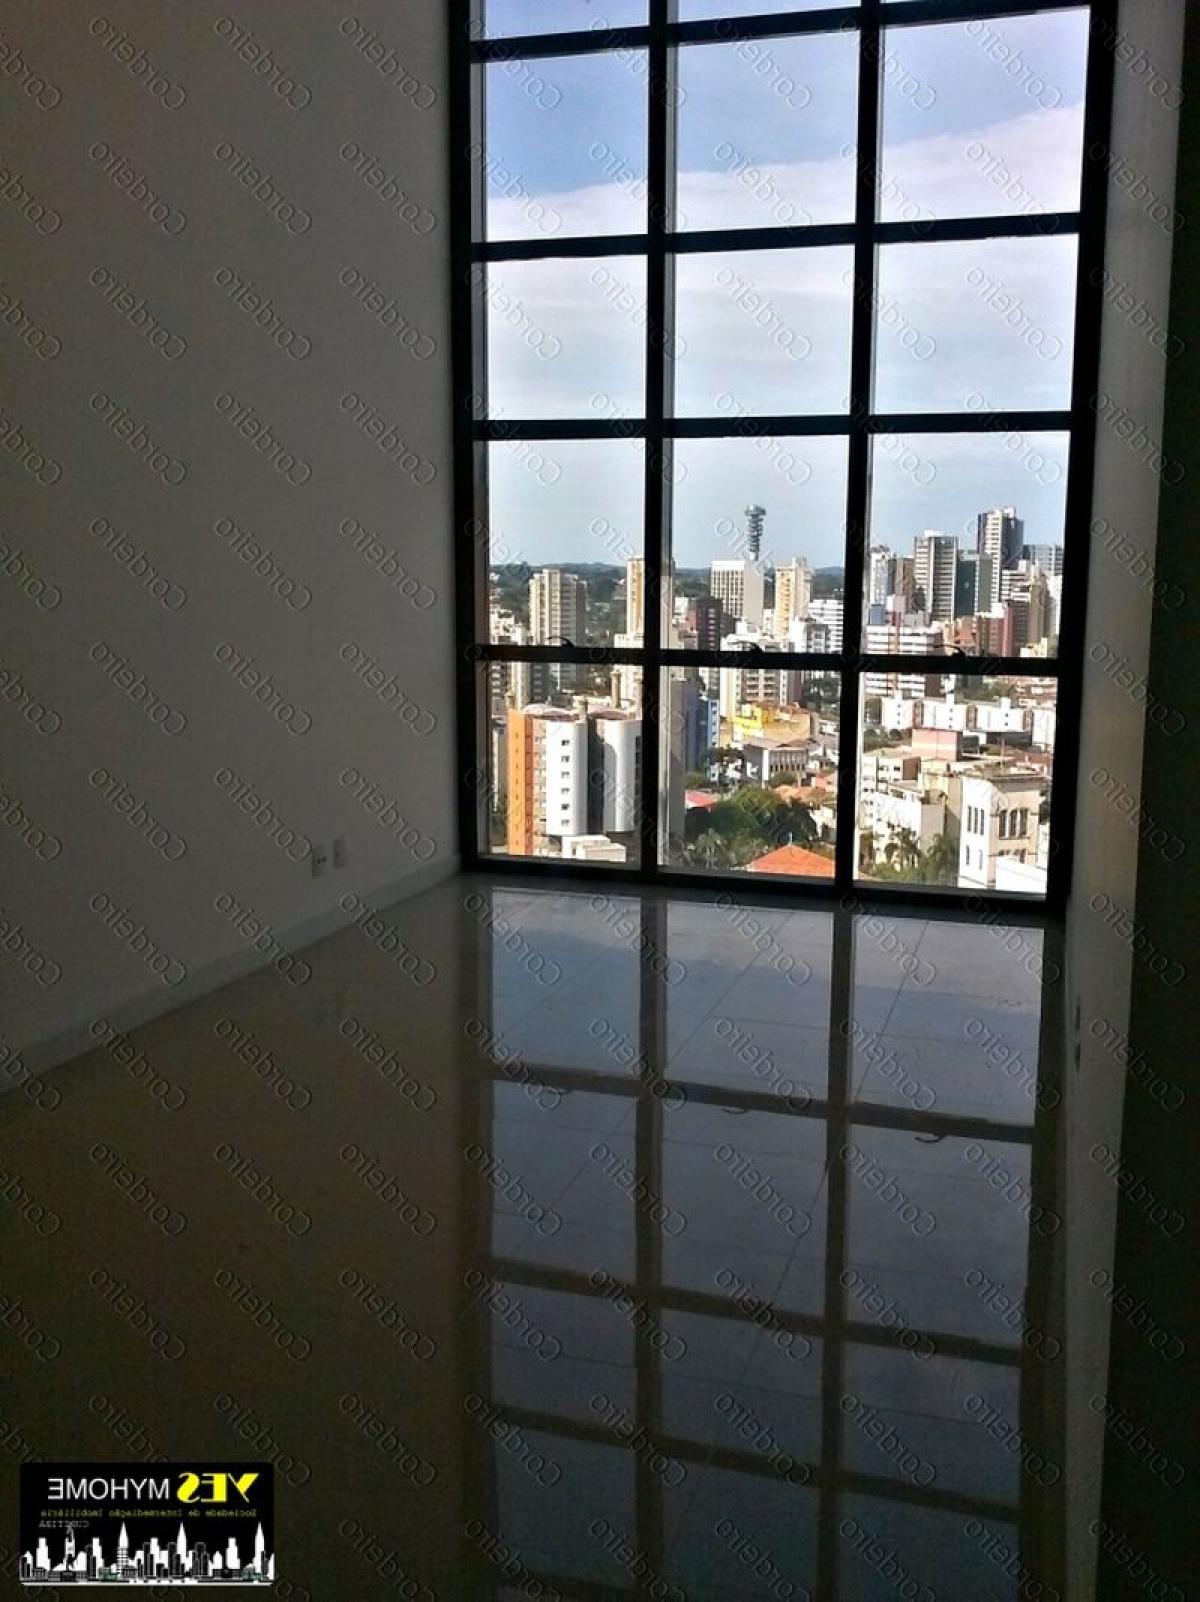 Picture of Apartment For Sale in Curitiba, Parana, Brazil